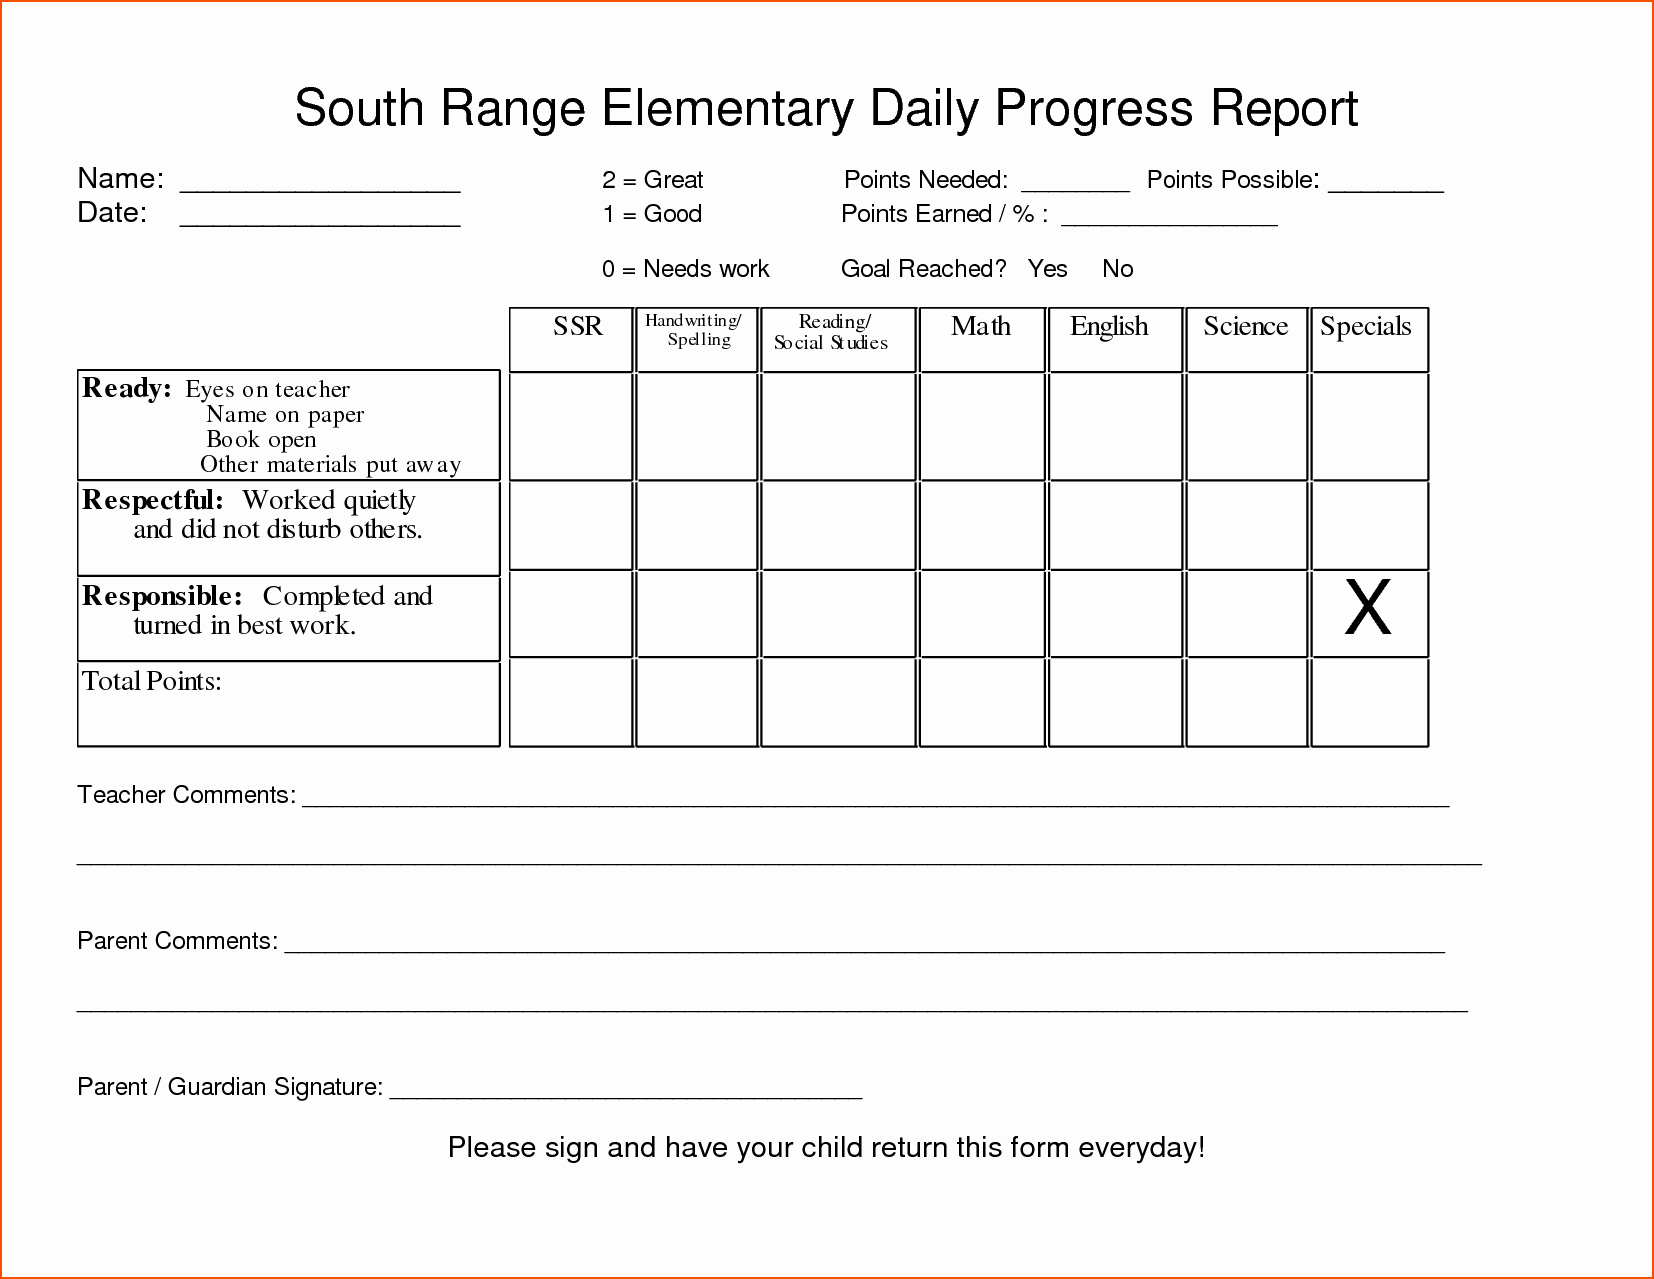 40 Student Progress Report Template | Markmeckler Template With Regard To Educational Progress Report Template